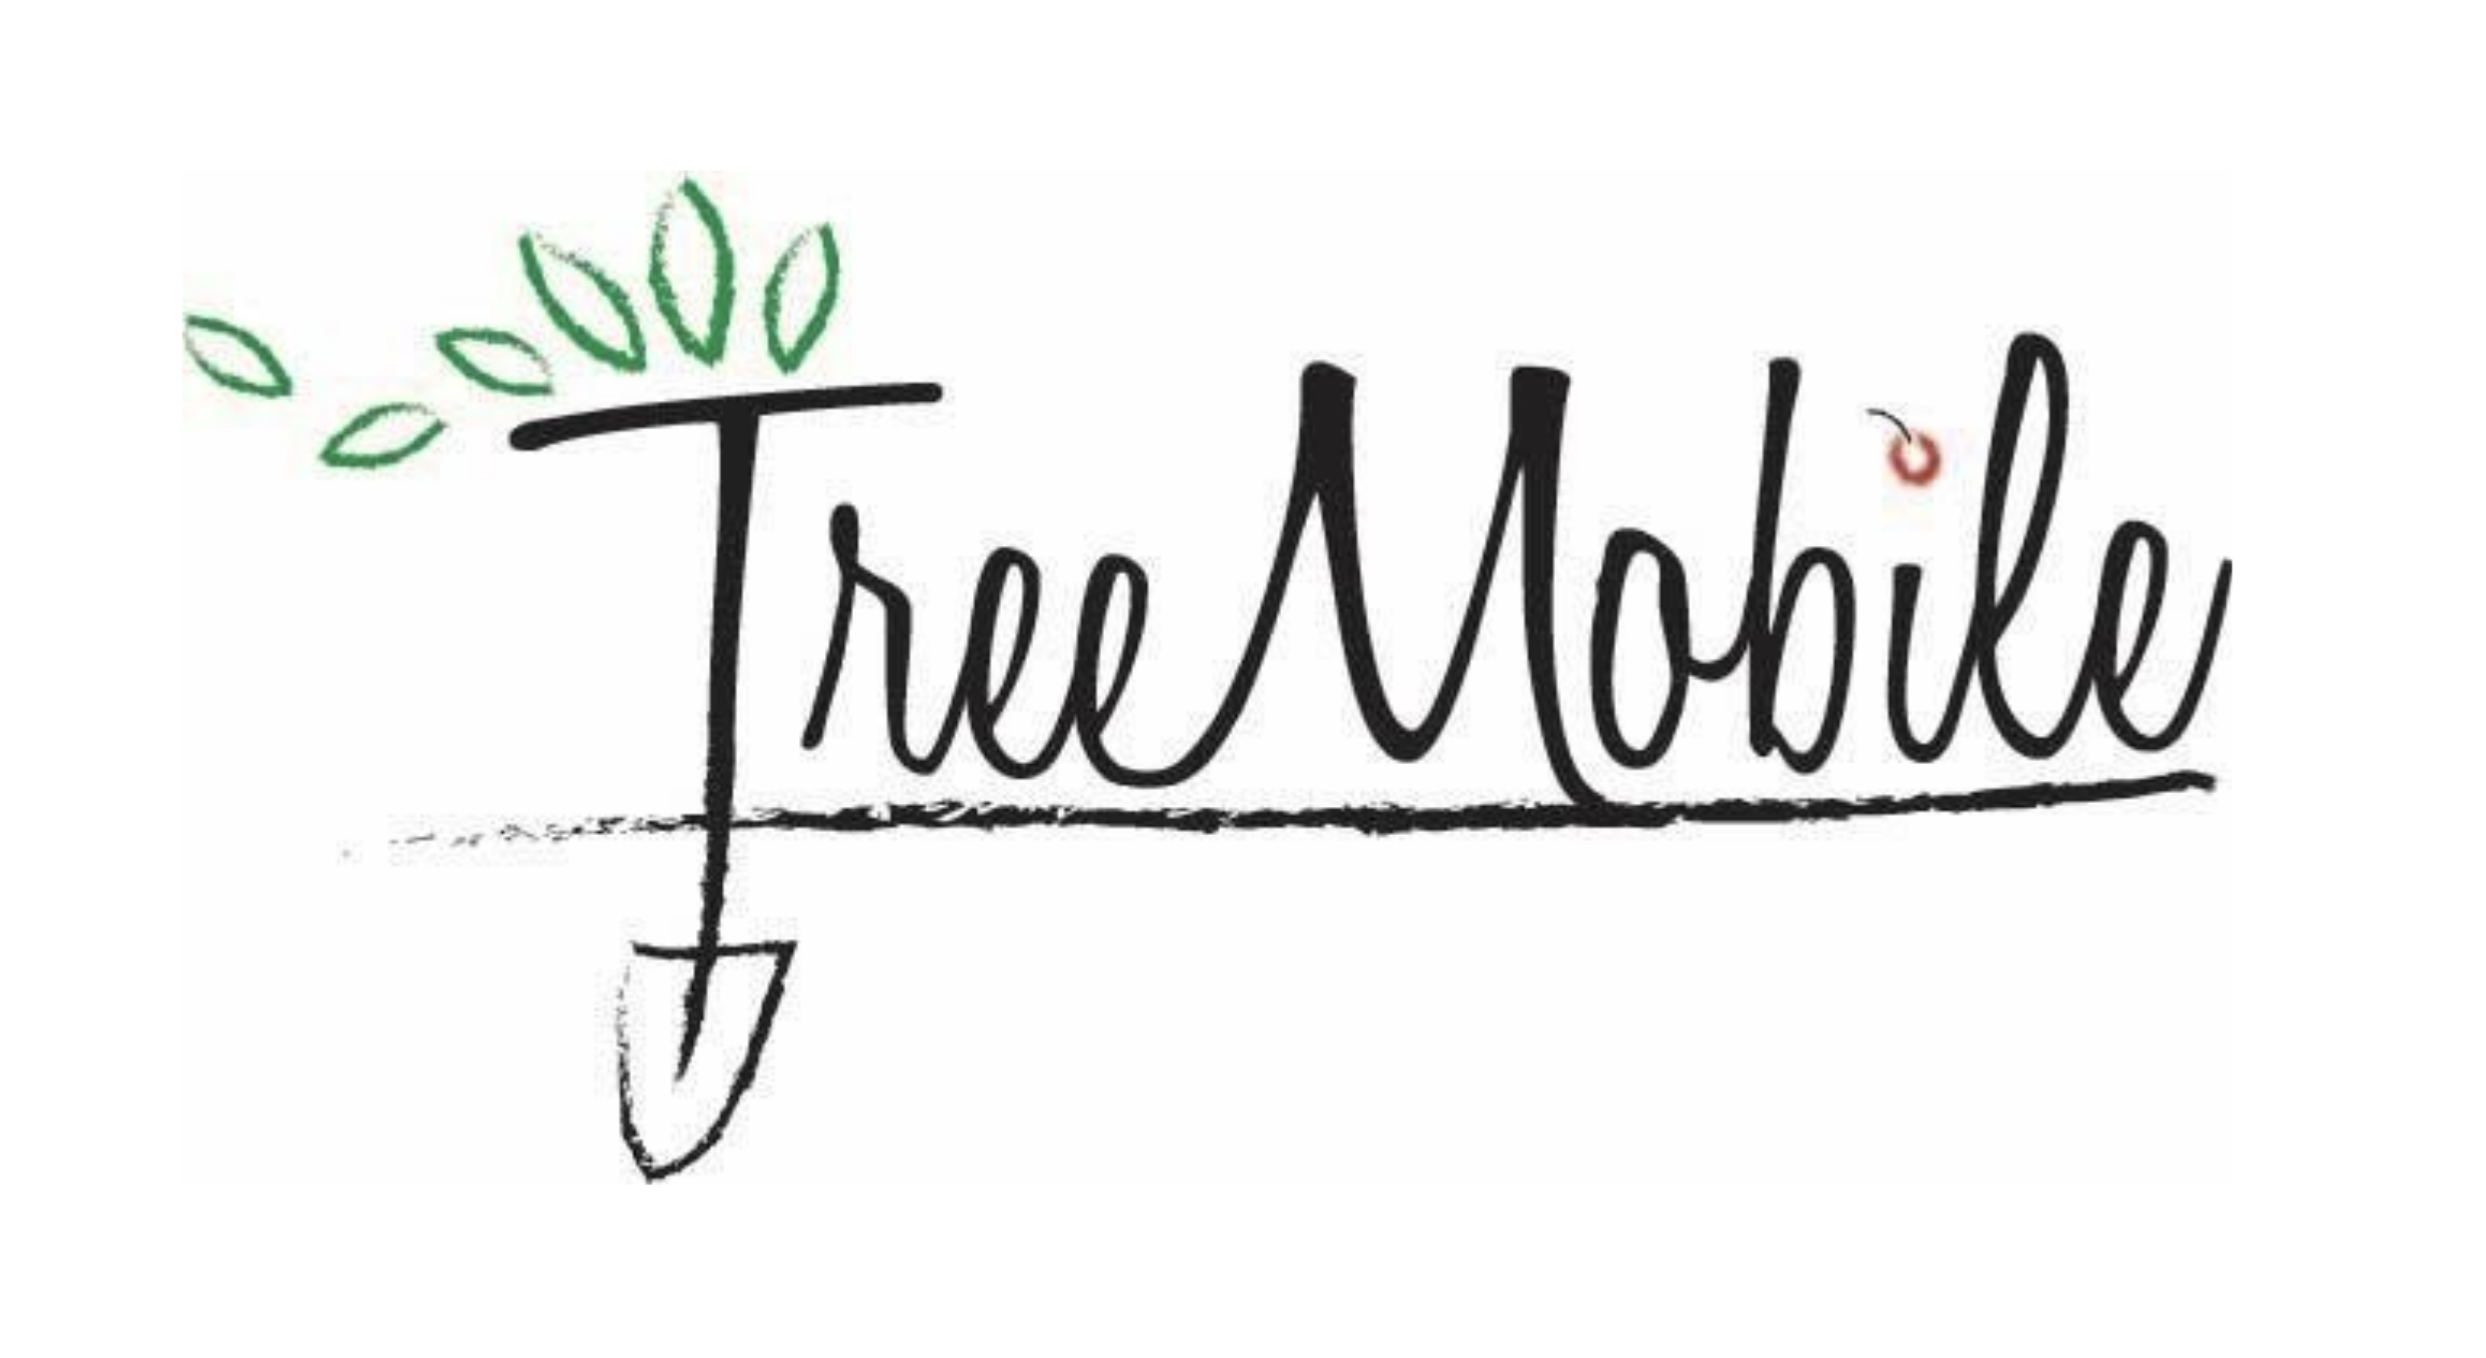 TreeMobile logo, a hand-written script where the "T" is made into a shovel with gerenery on the top.